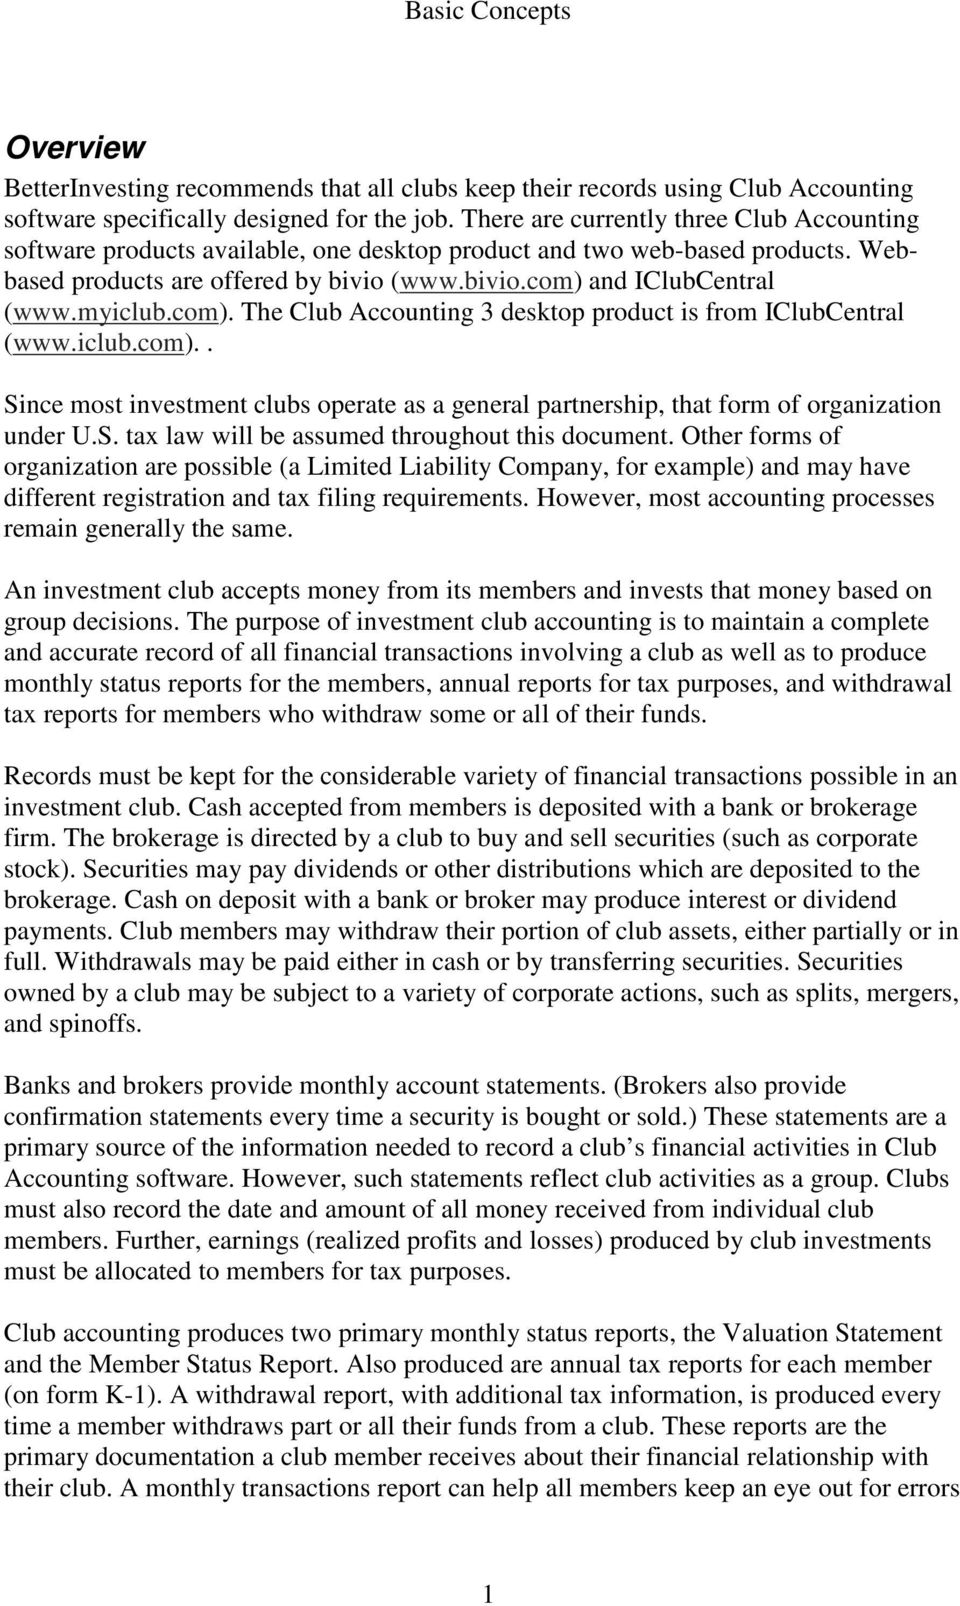 myiclub.com). The Club Accounting 3 desktop product is from IClubCentral (www.iclub.com).. Since most investment clubs operate as a general partnership, that form of organization under U.S. tax law will be assumed throughout this document.